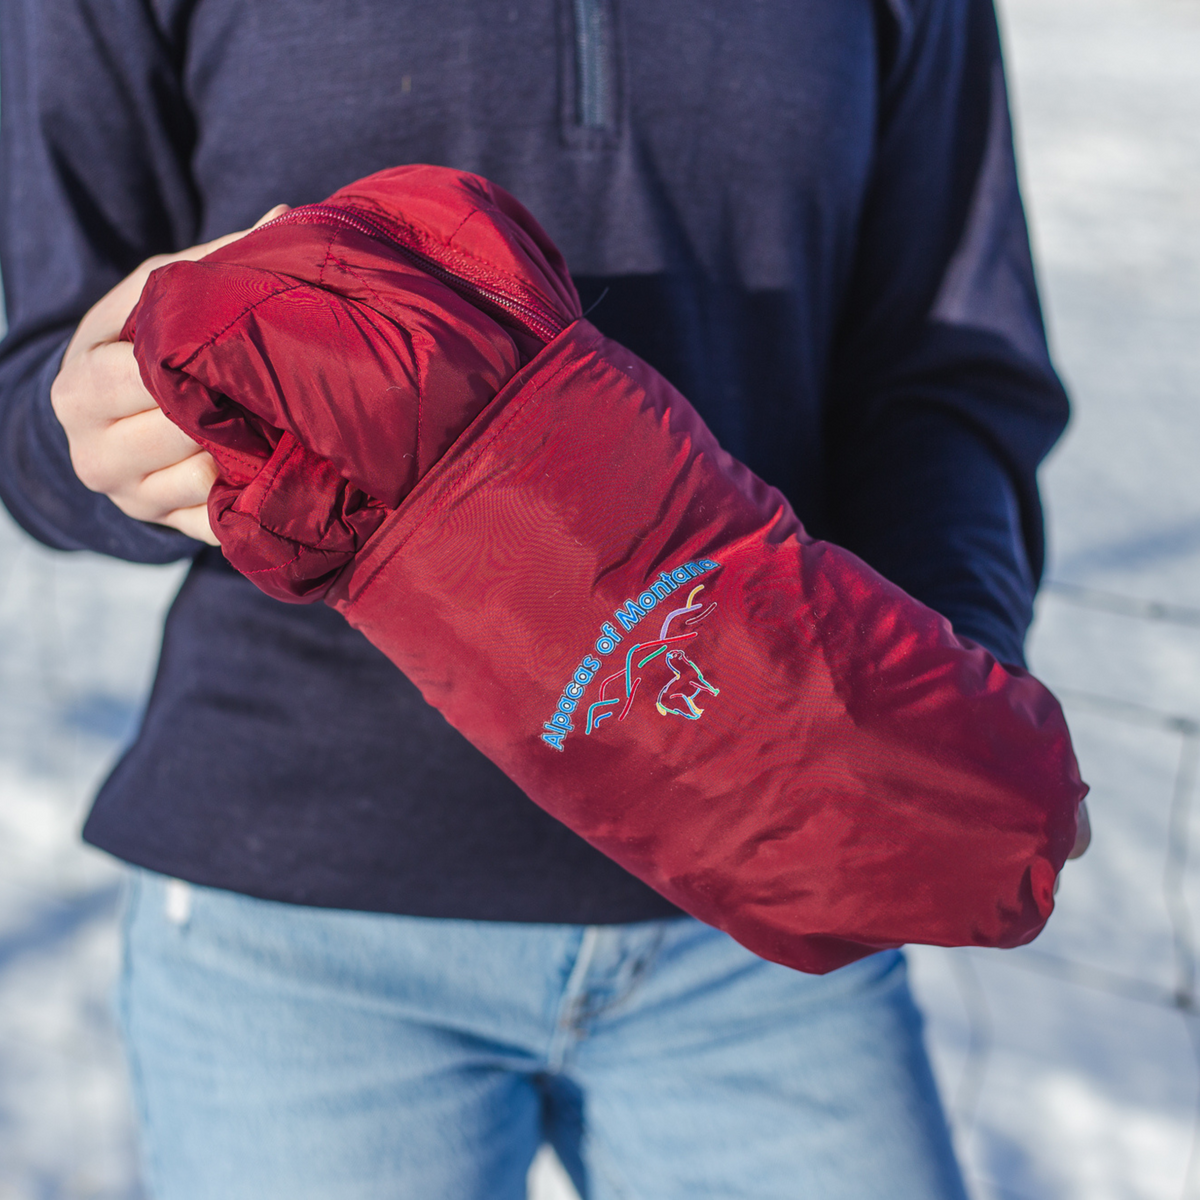 A person holding a red fabric bag with the Alpacas of Montana logo on it. Inside the bag is a cranberry red Alpacas of Montana warm top layer insulated cozy comfortable thermal winter outerwear lightweight alpaca wool insulated women&#39;s tempest coat jacket parka for skiing, snowboarding, ice fishing, hunting, camping, arctic, travel, outdoors